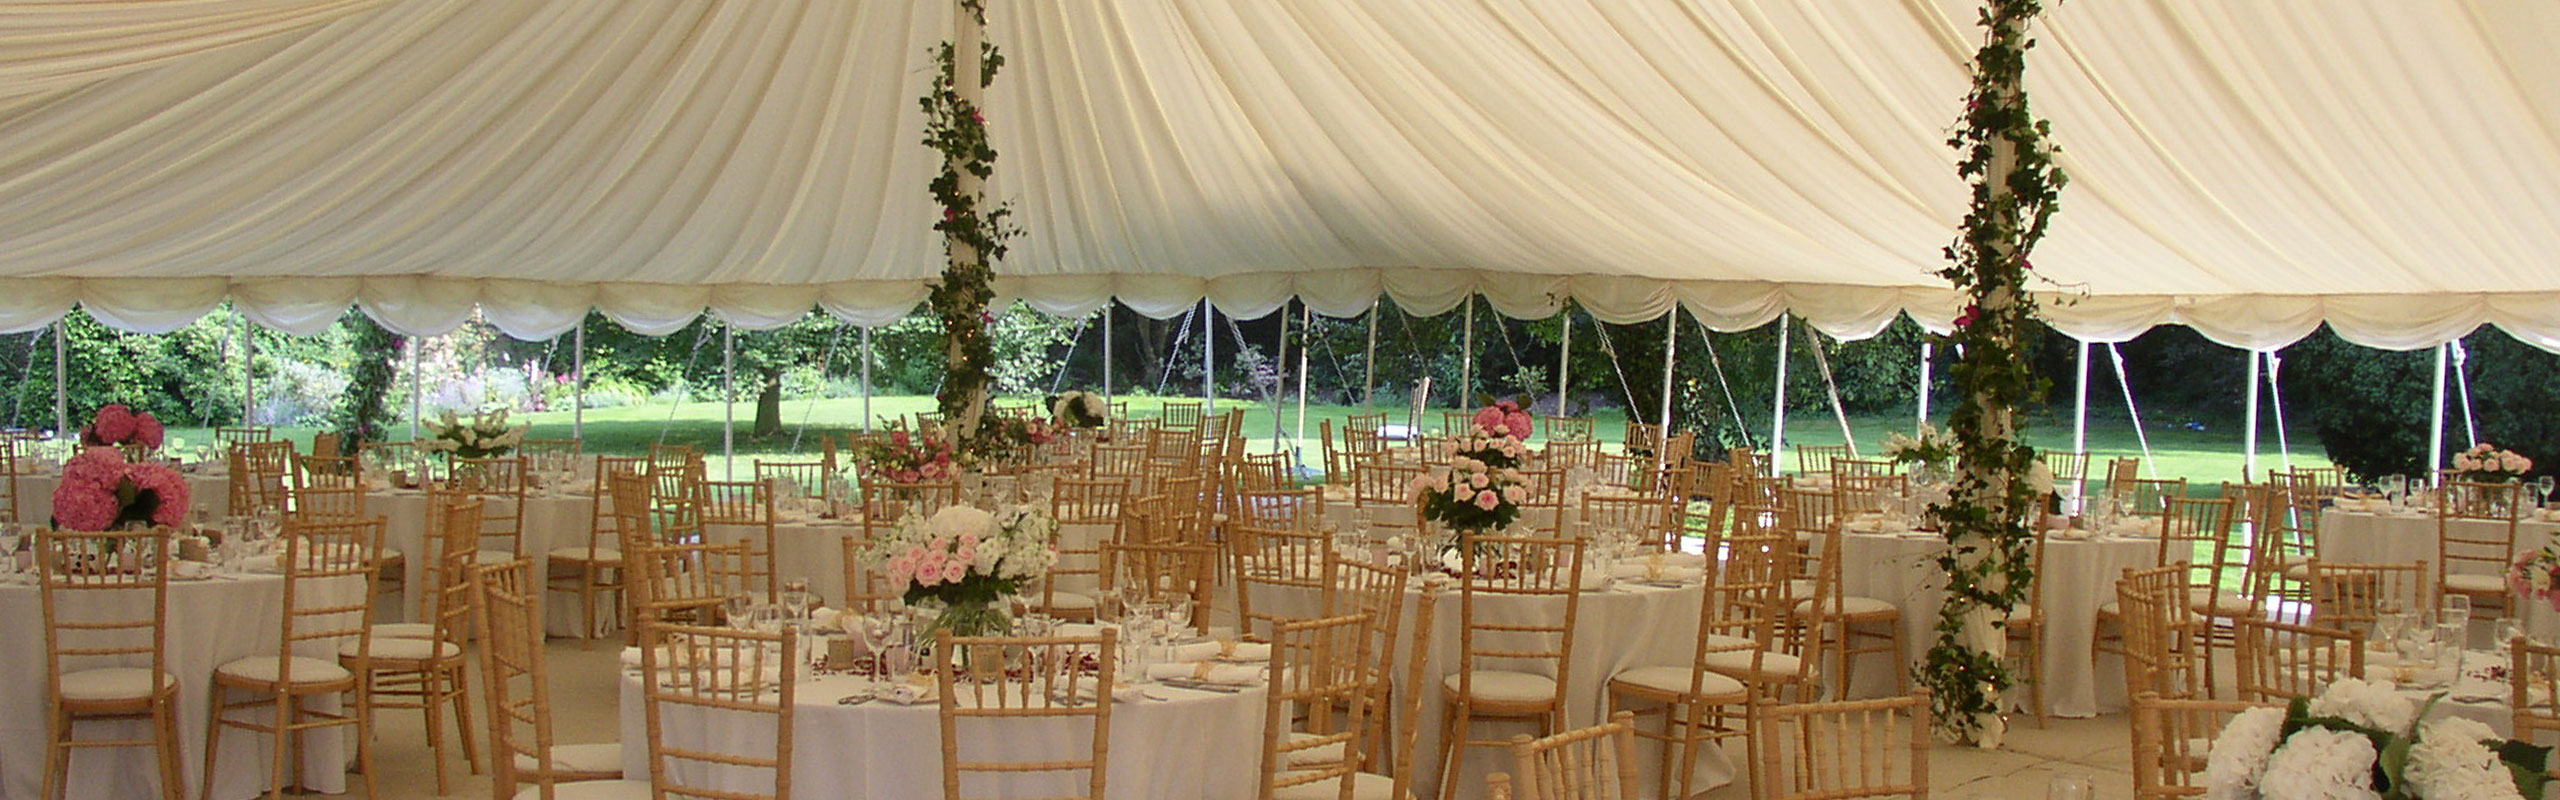 Wedding Marquee for Sale Large